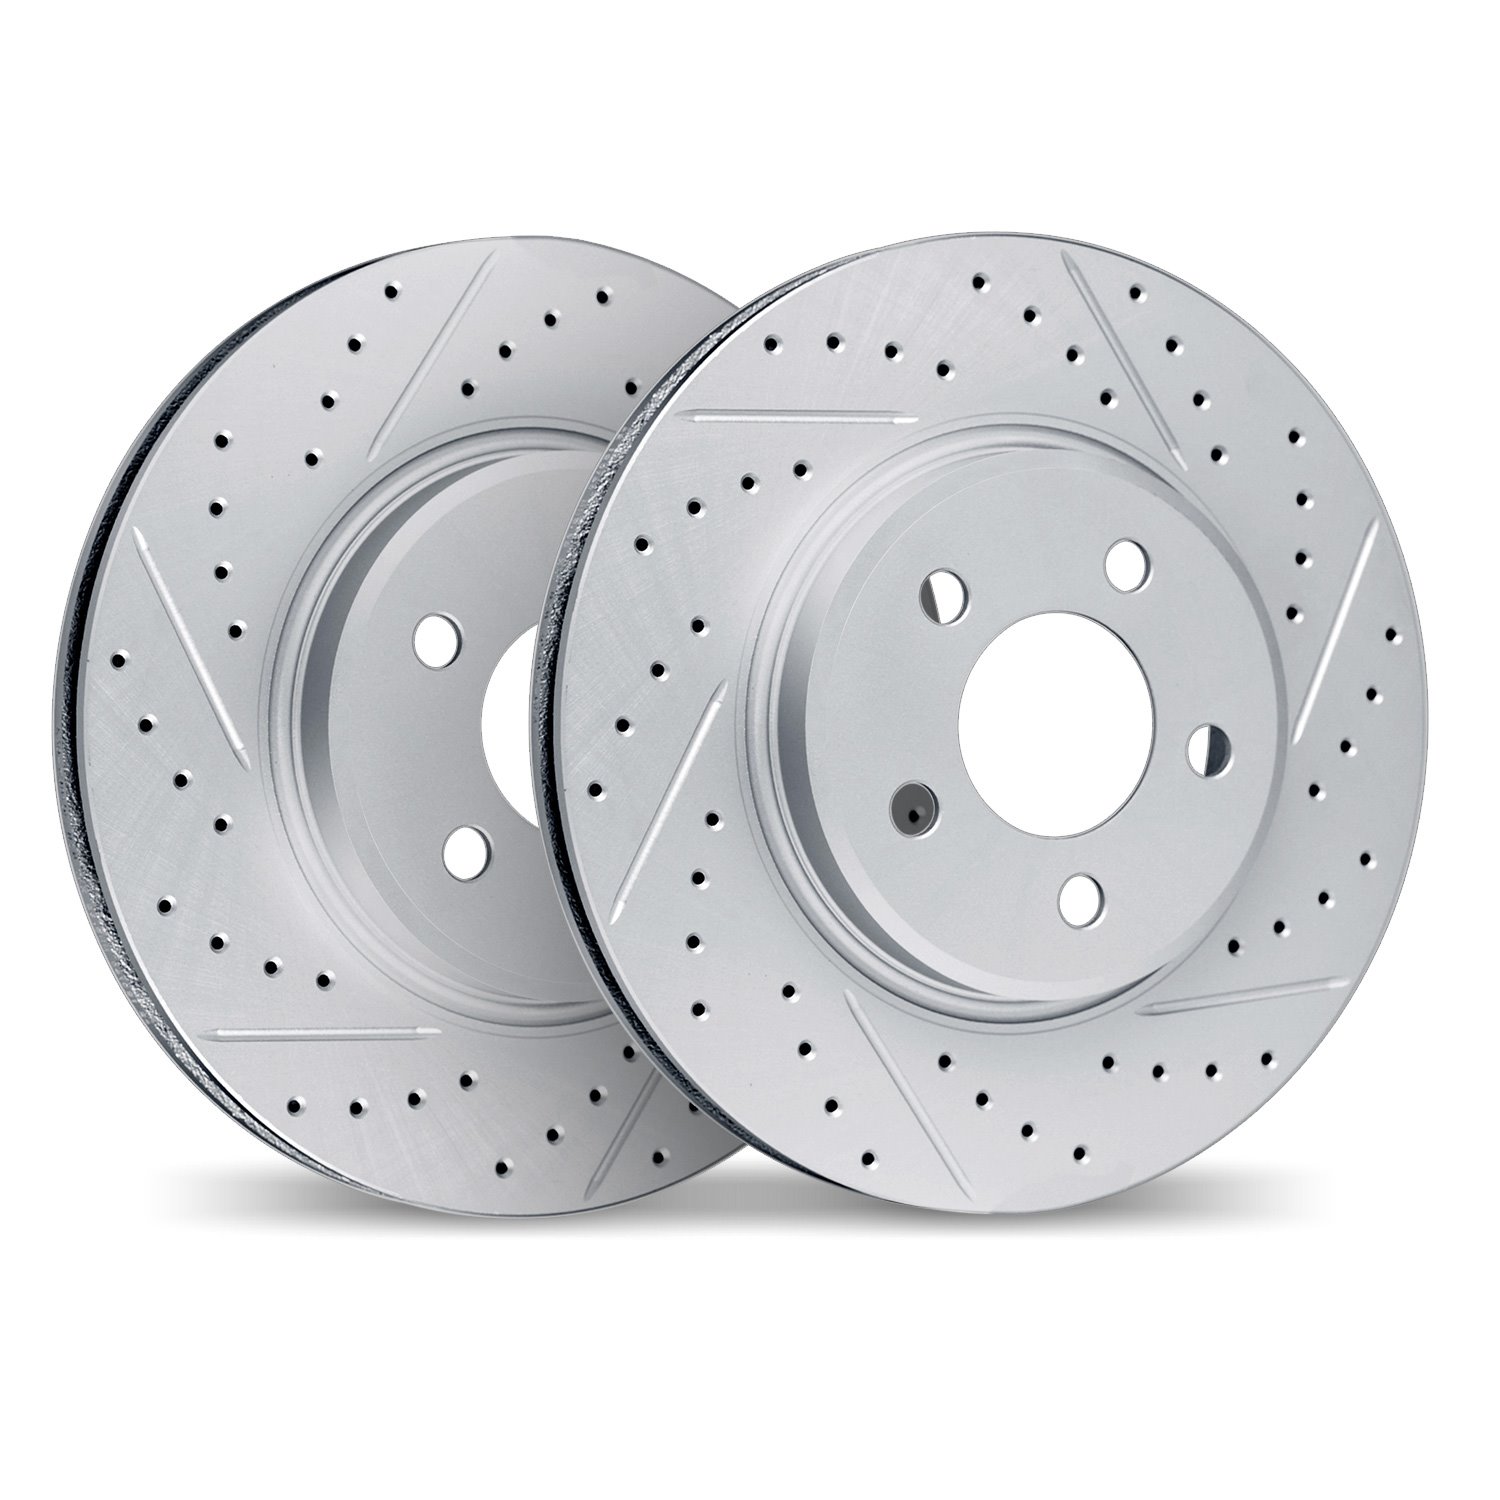 2002-76201 Geoperformance Drilled/Slotted Brake Rotors, Fits Select Lexus/Toyota/Scion, Position: Front